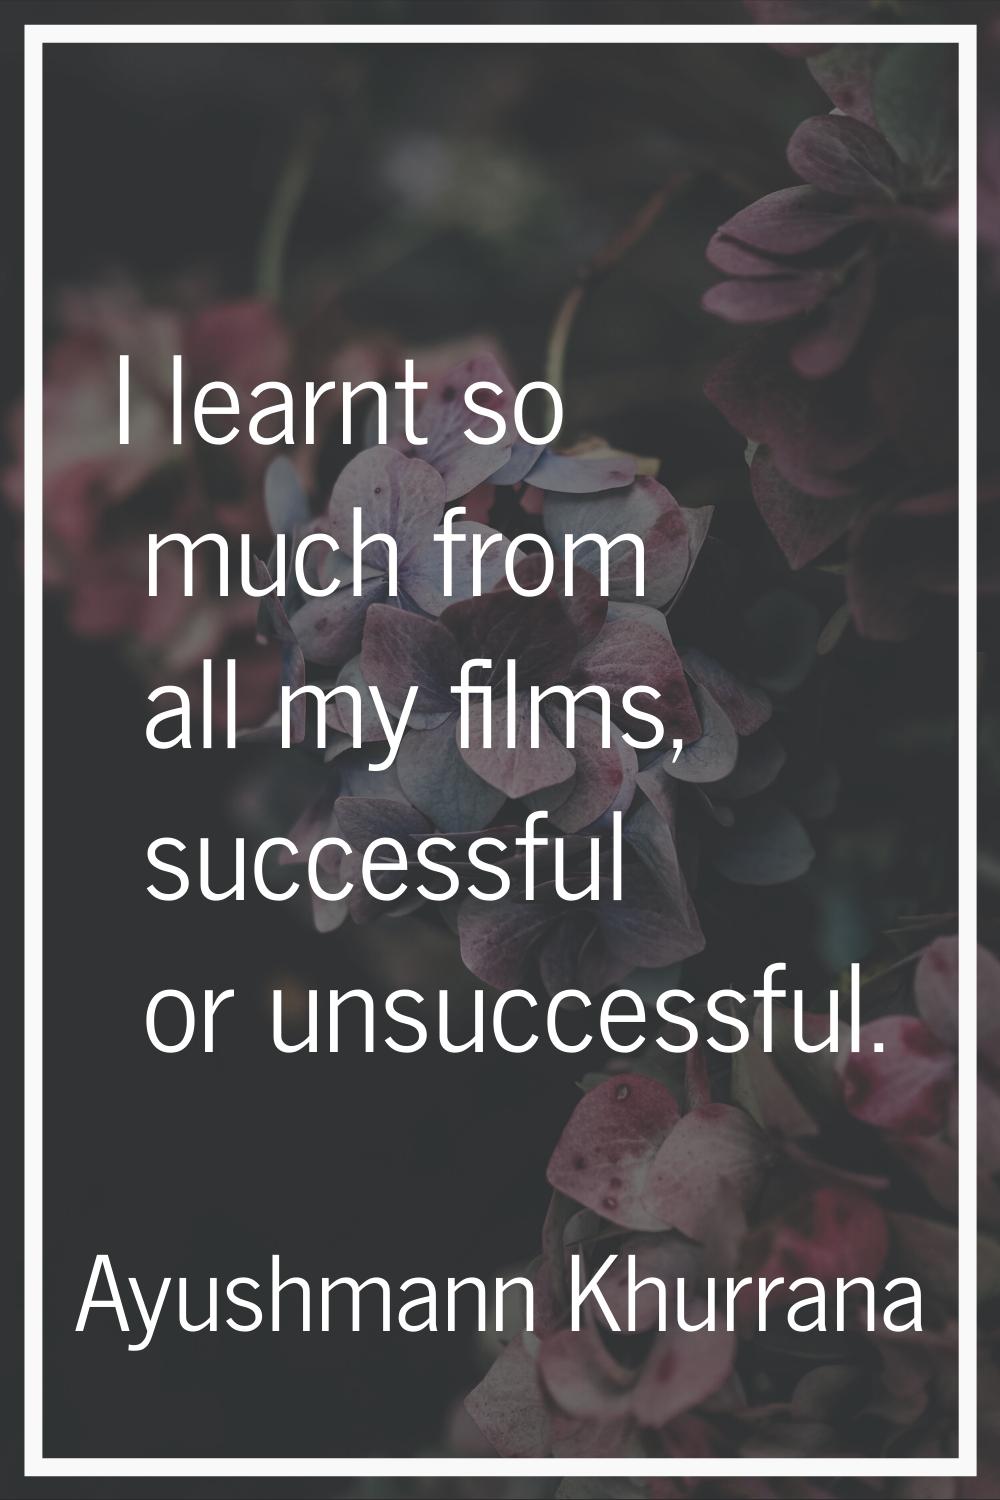 I learnt so much from all my films, successful or unsuccessful.